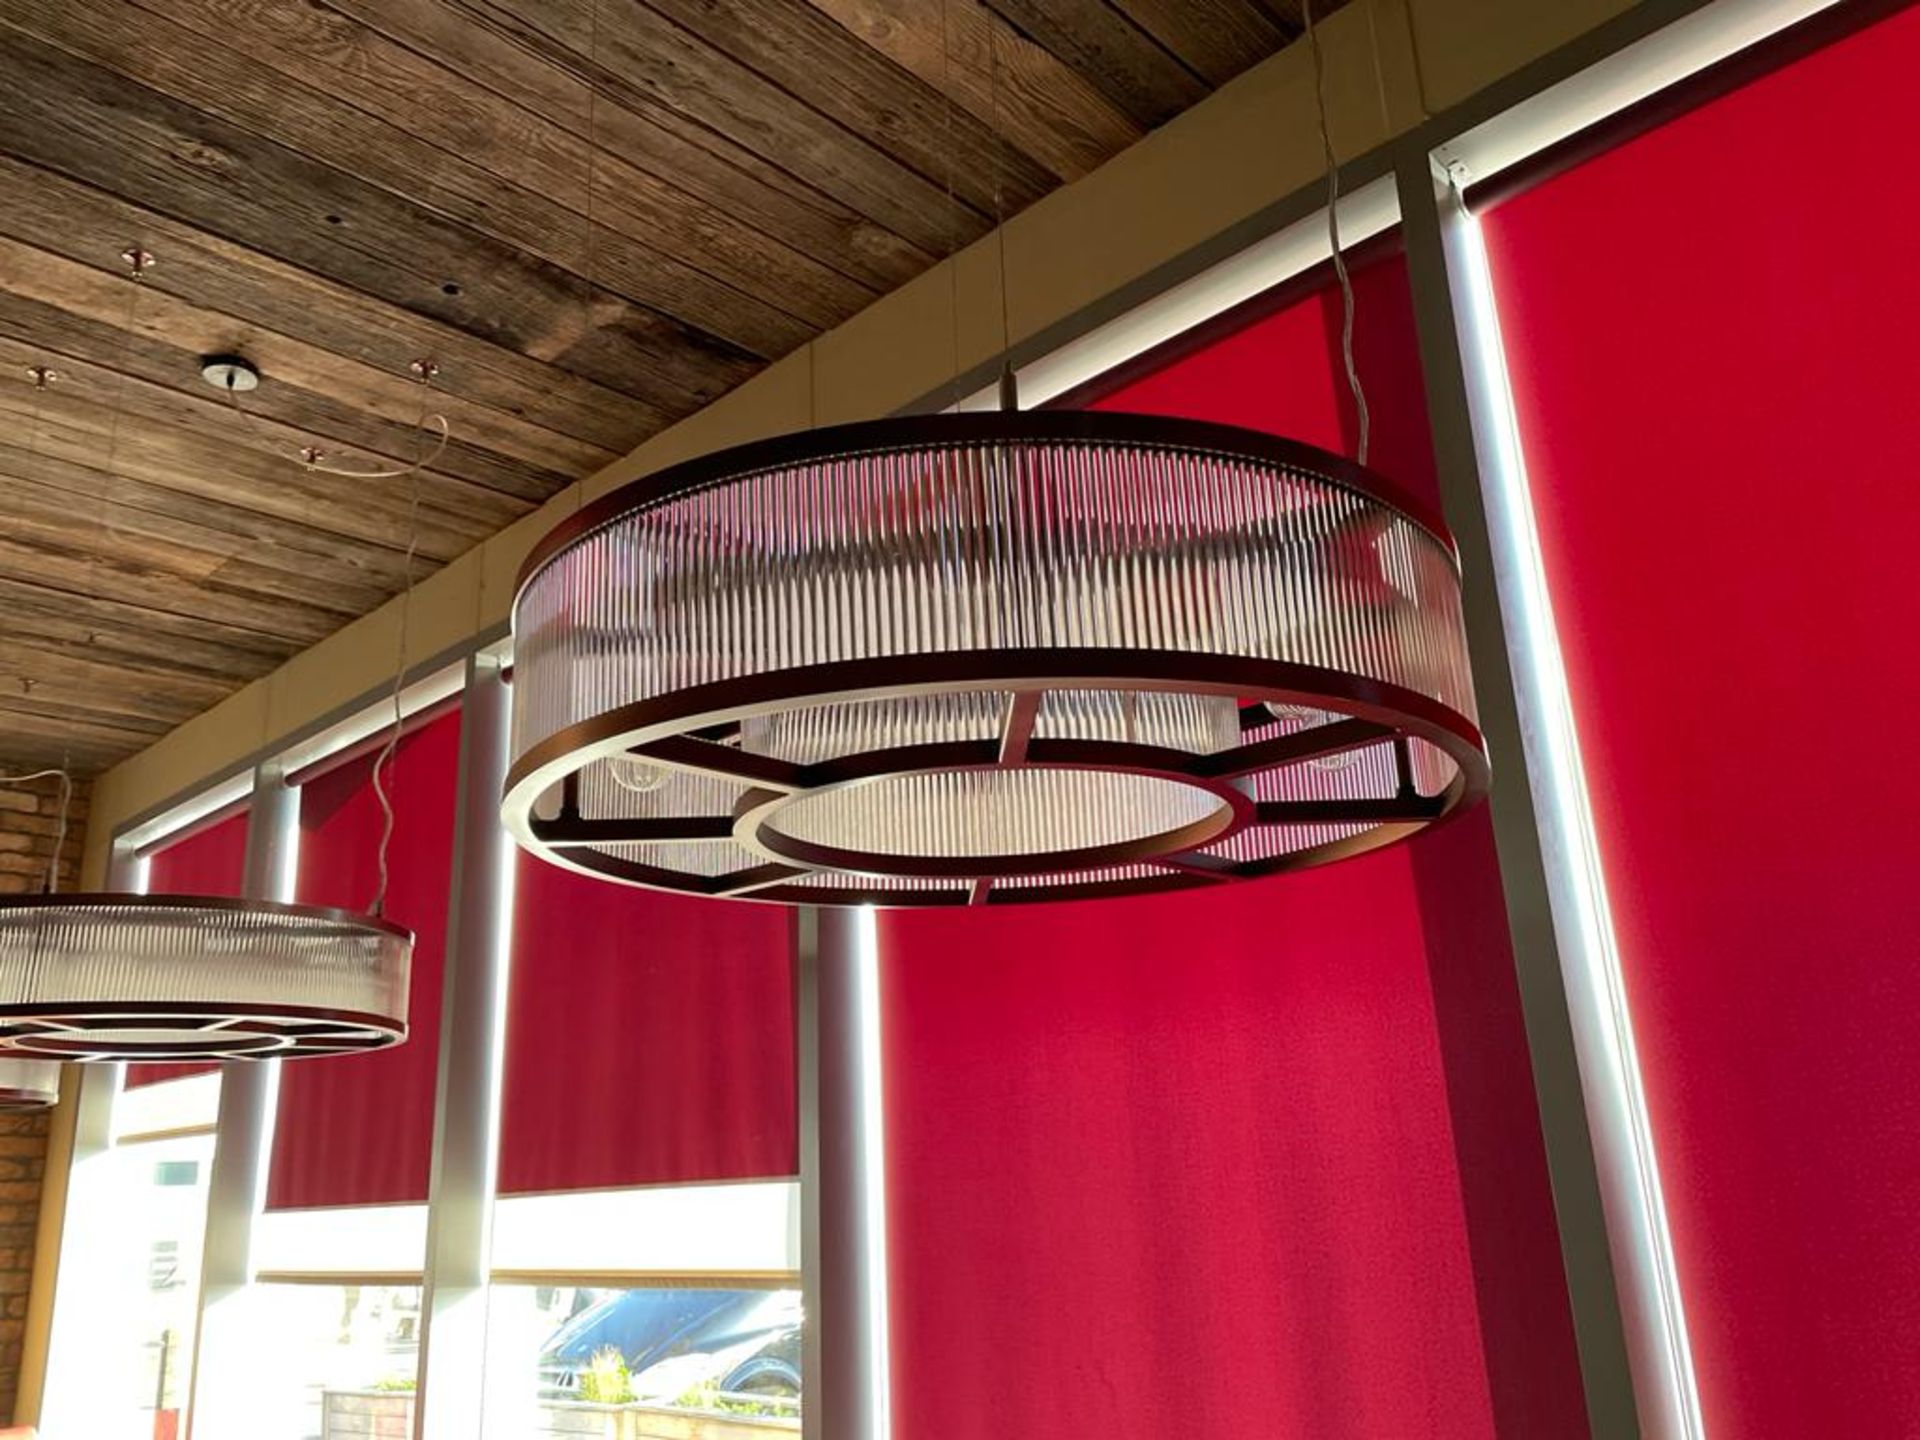 1 x Large Commercial Circular Art Deco-Style Suspended Light Fitting - Features A Copper Finish - Image 3 of 5